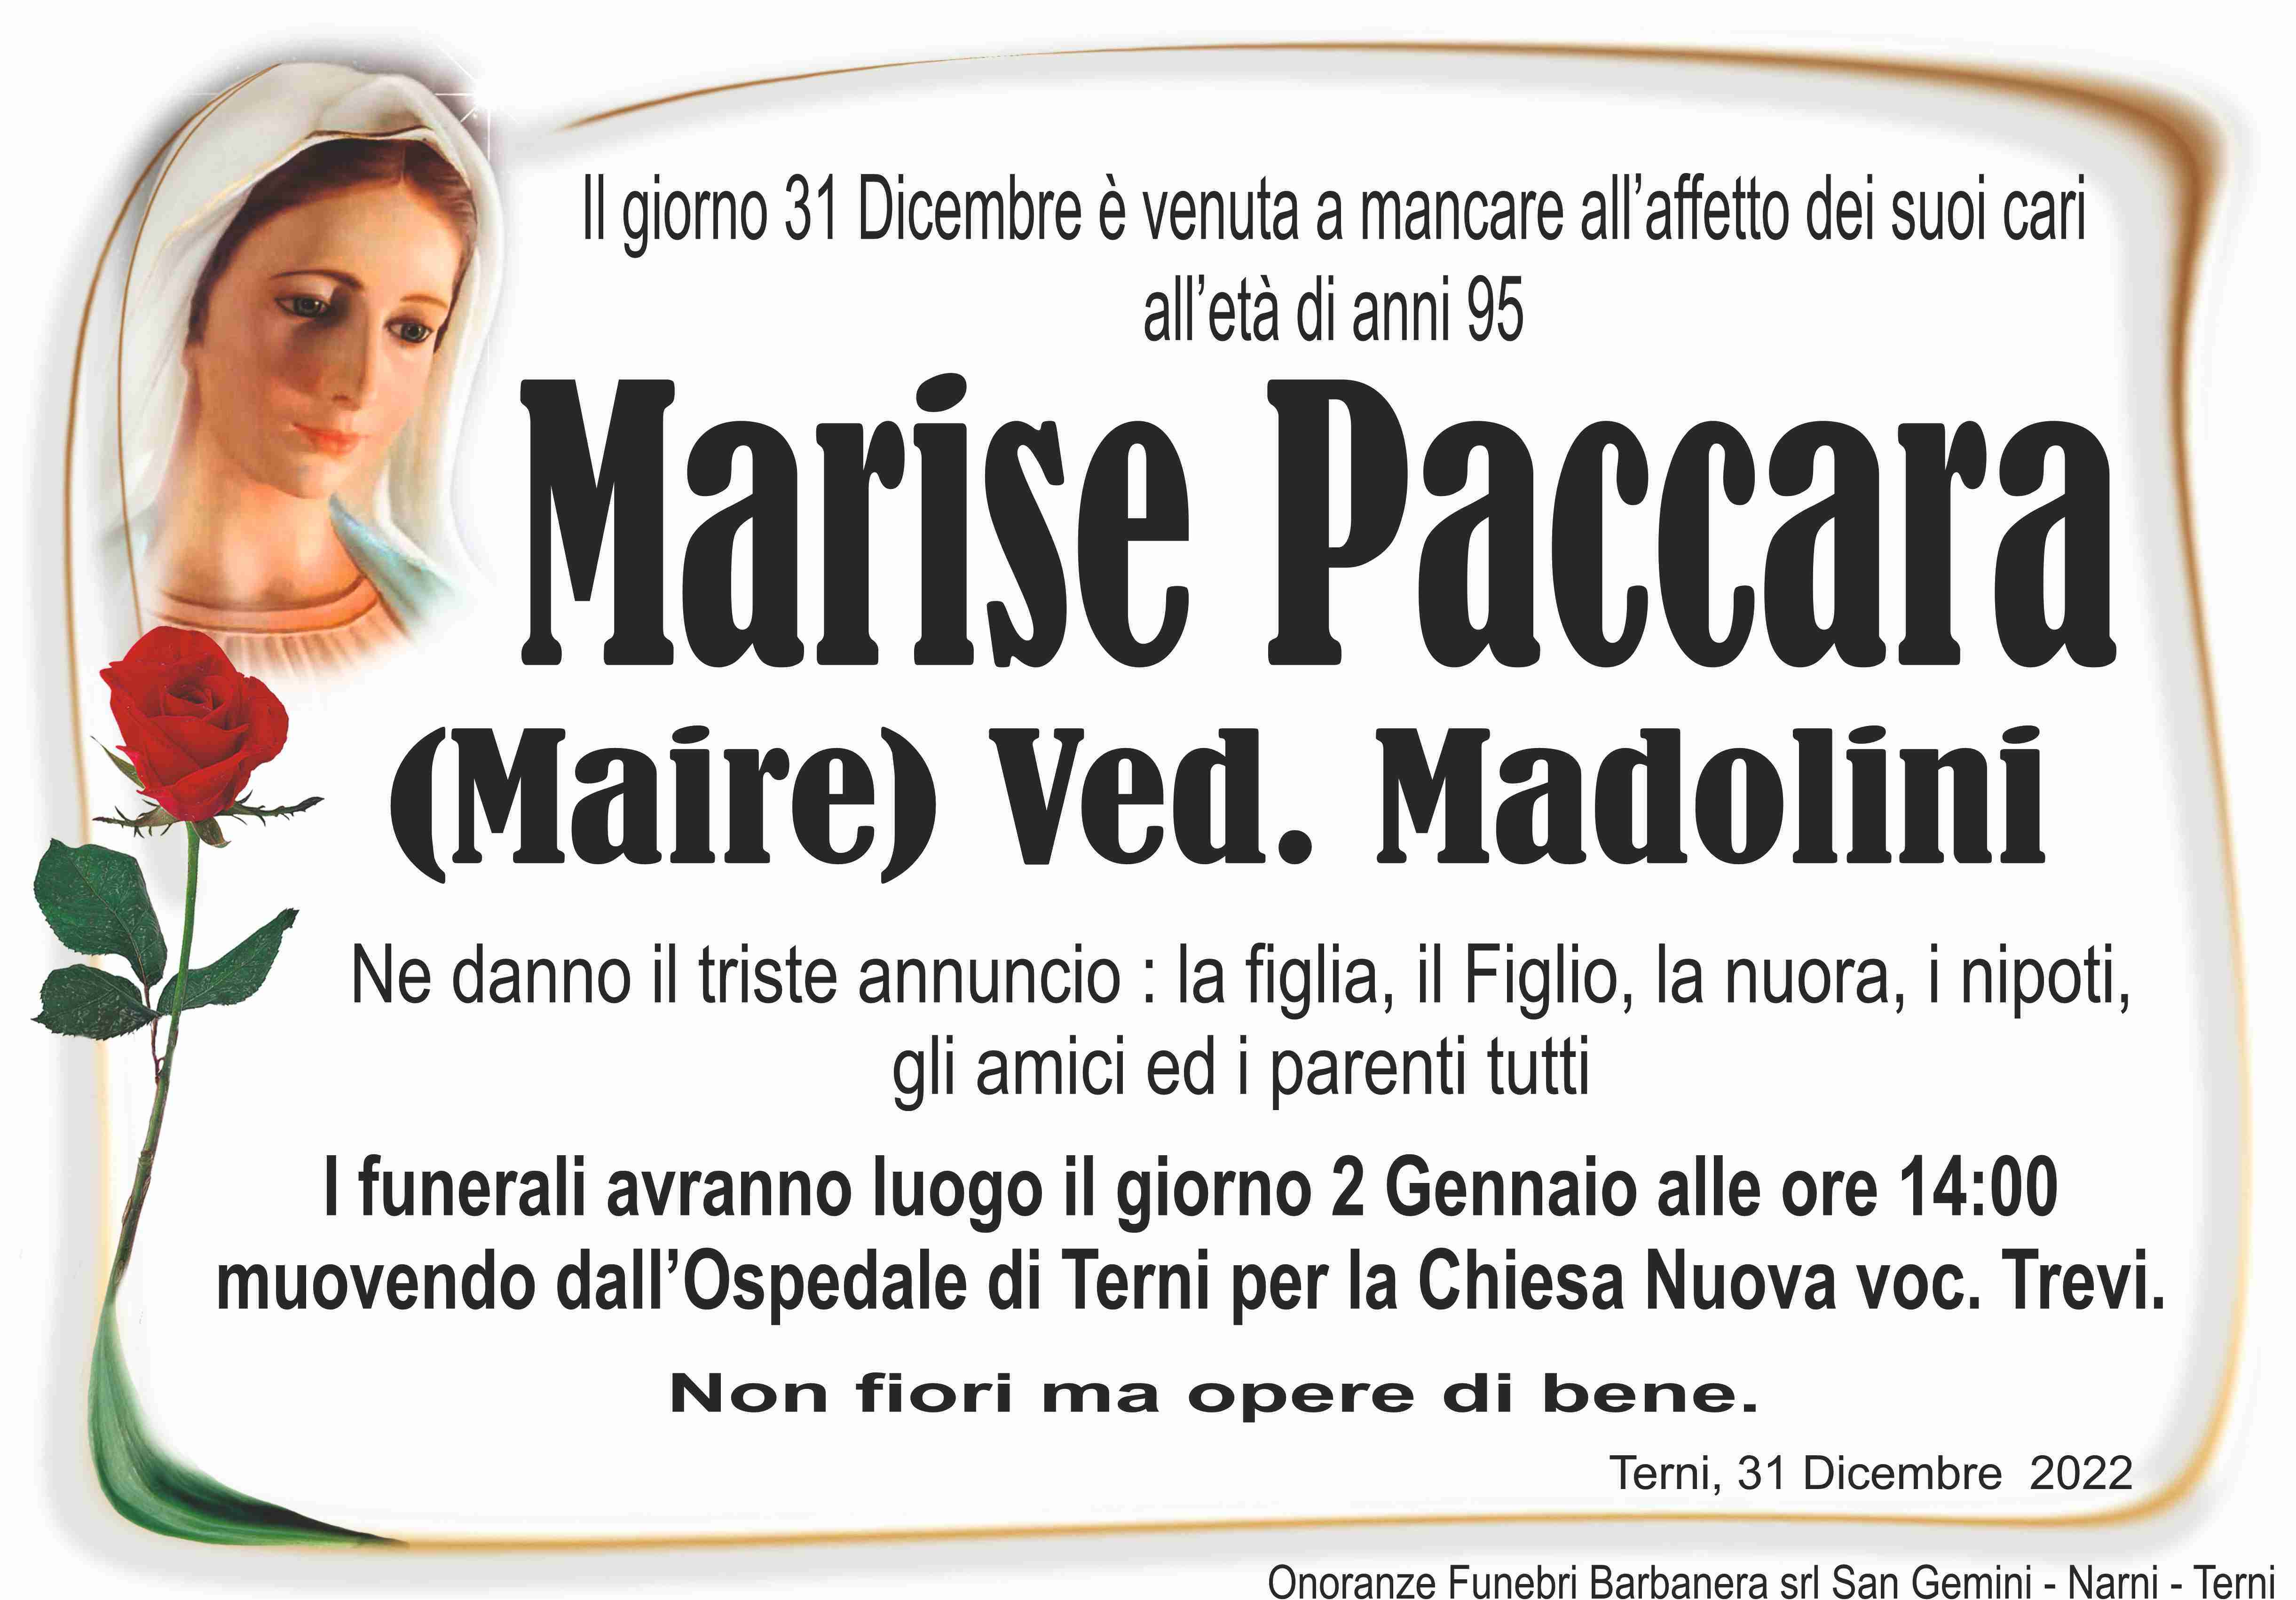 Paccara Marise (Maire)